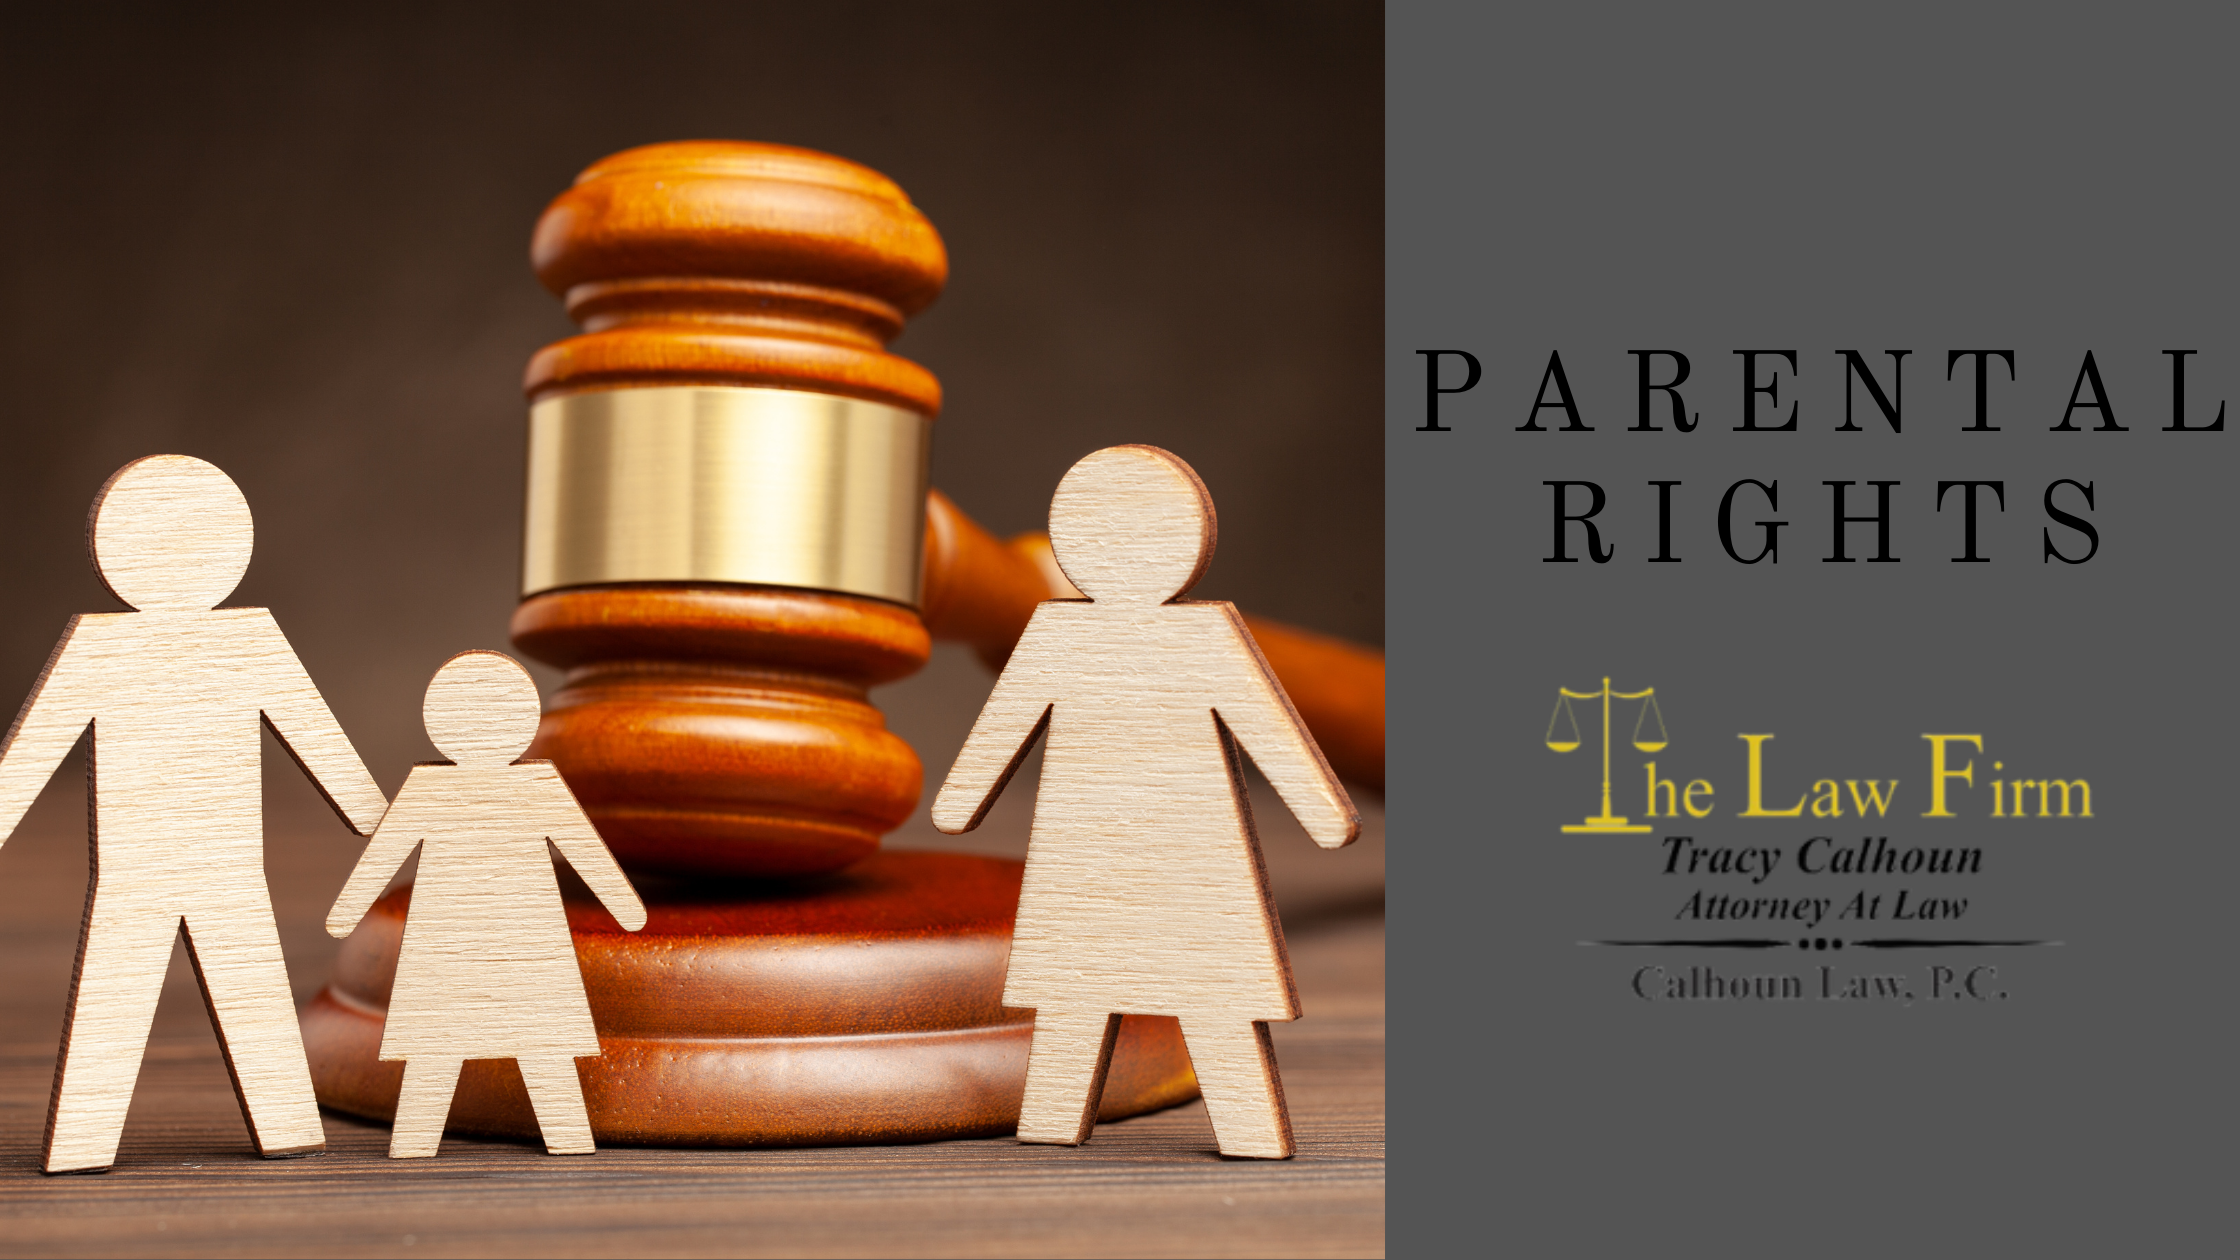 Parental Rights